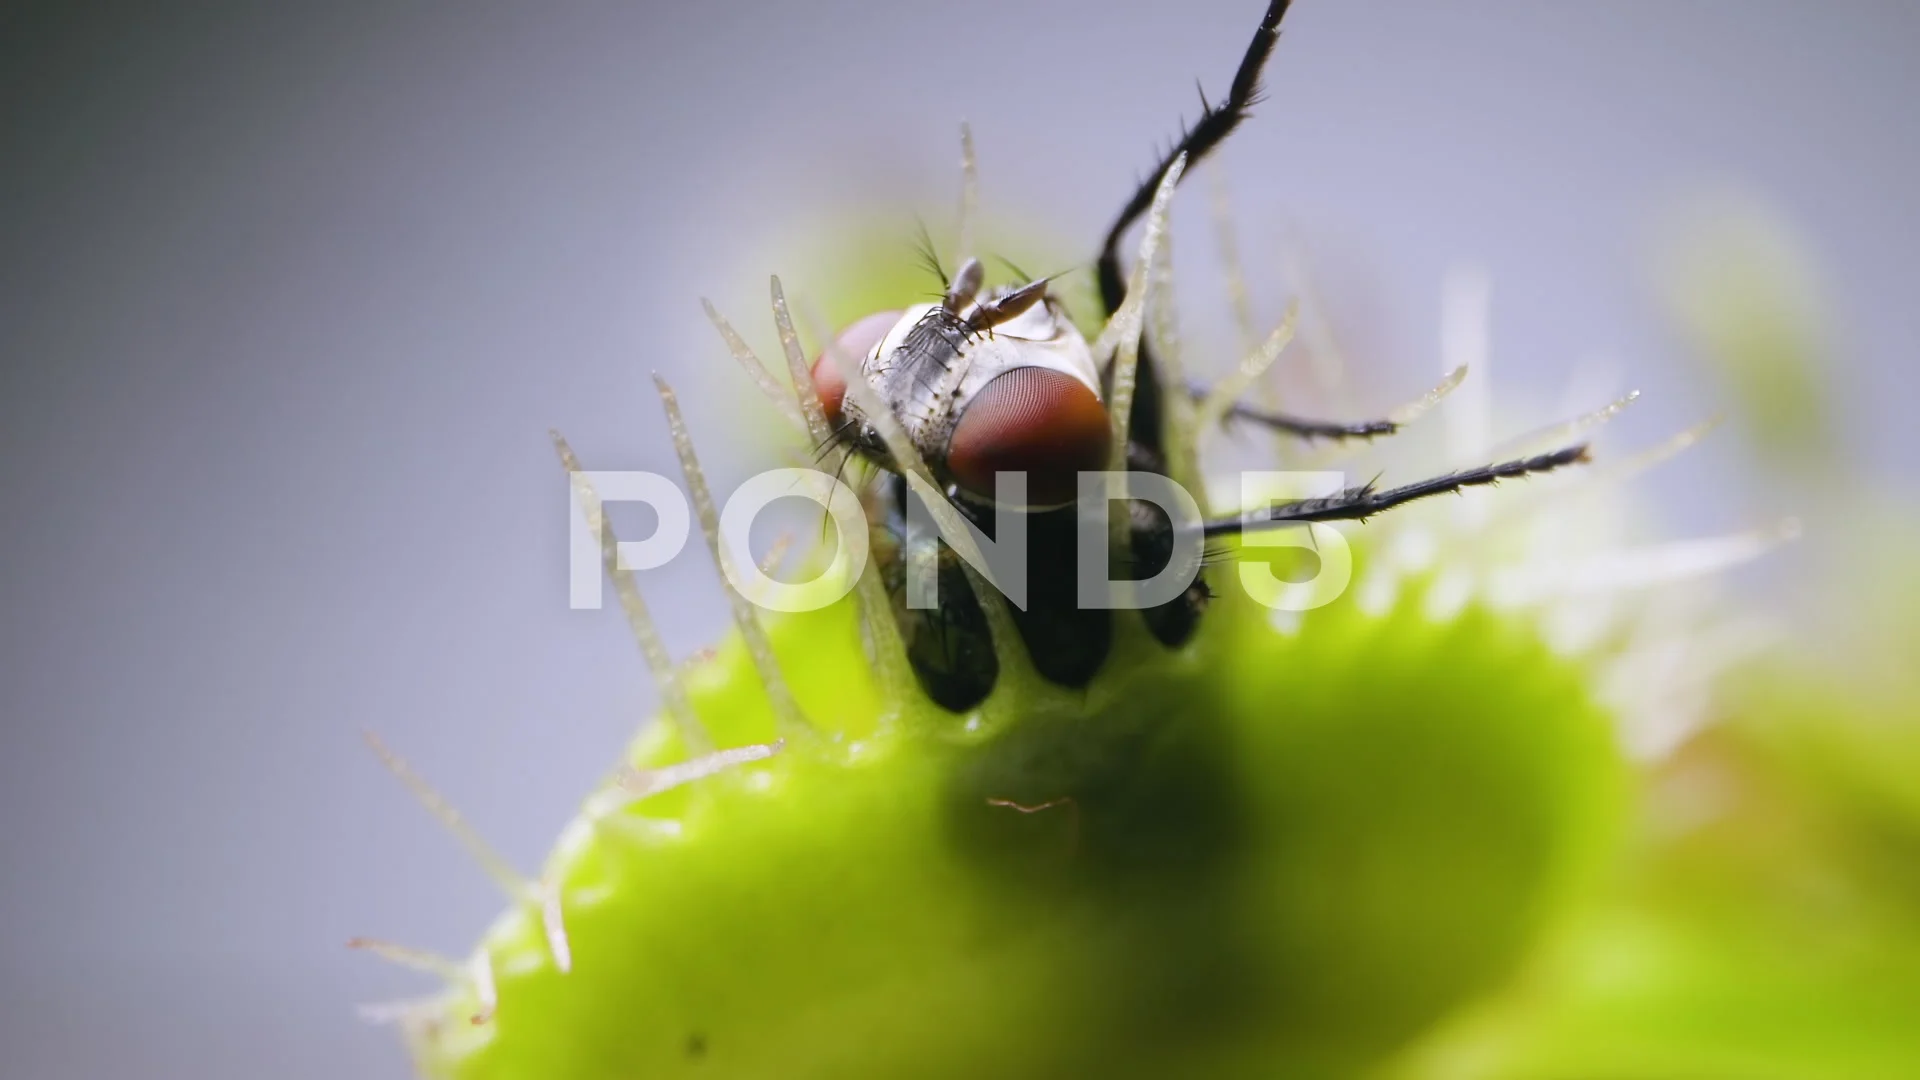 Decomposed housefly inside an opening venus fly trap - Stock Image -  C056/8561 - Science Photo Library